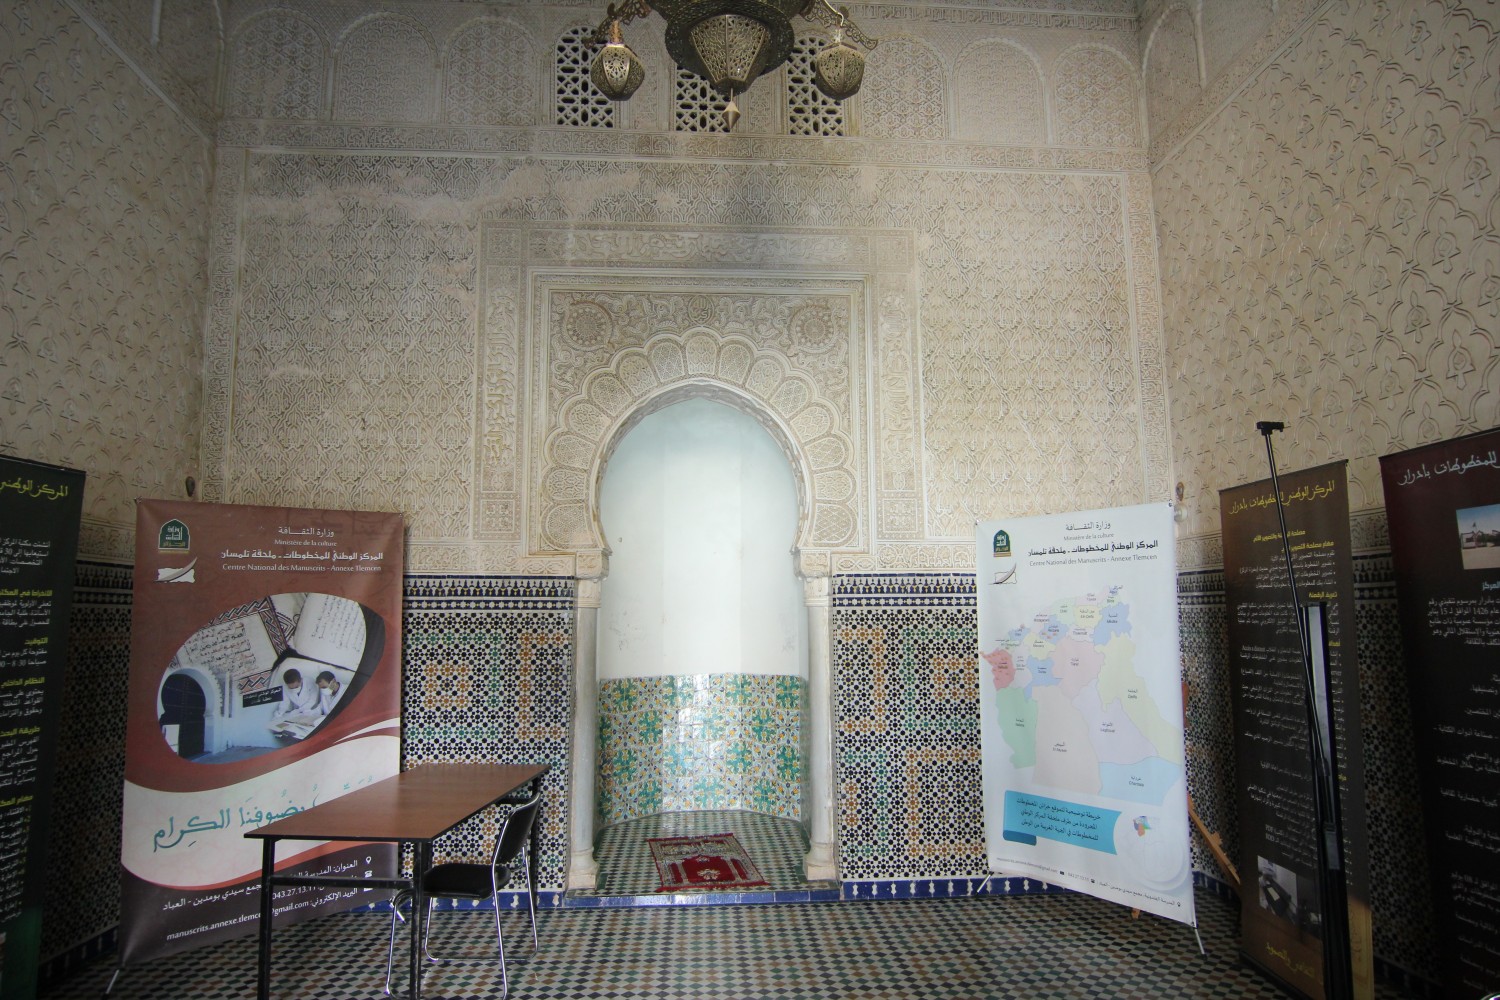 Frontal view of the mihrab of the prayer room